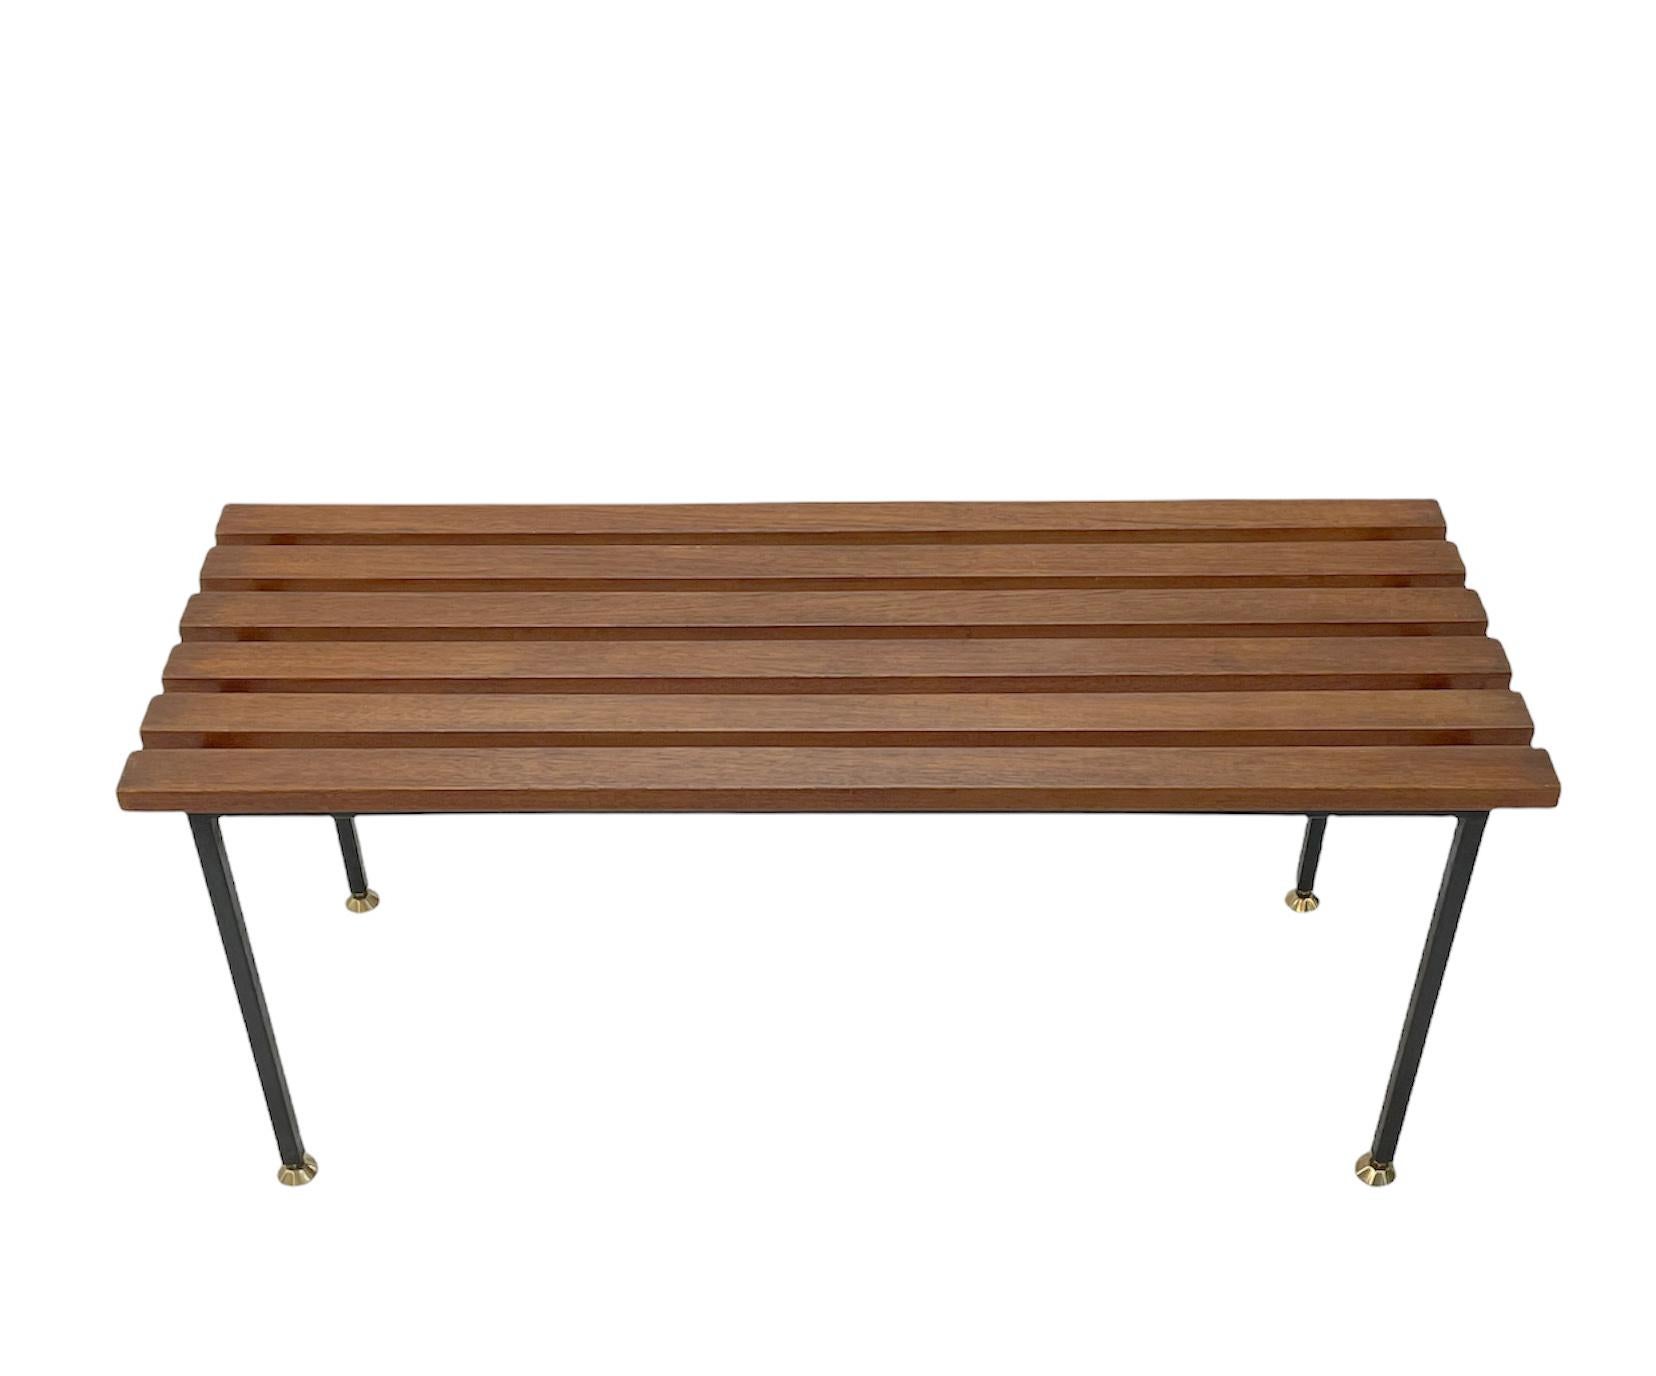 Midcentury Teak and Black Enameled Metal Italian Bench with Brass Feet, 1960s For Sale 13